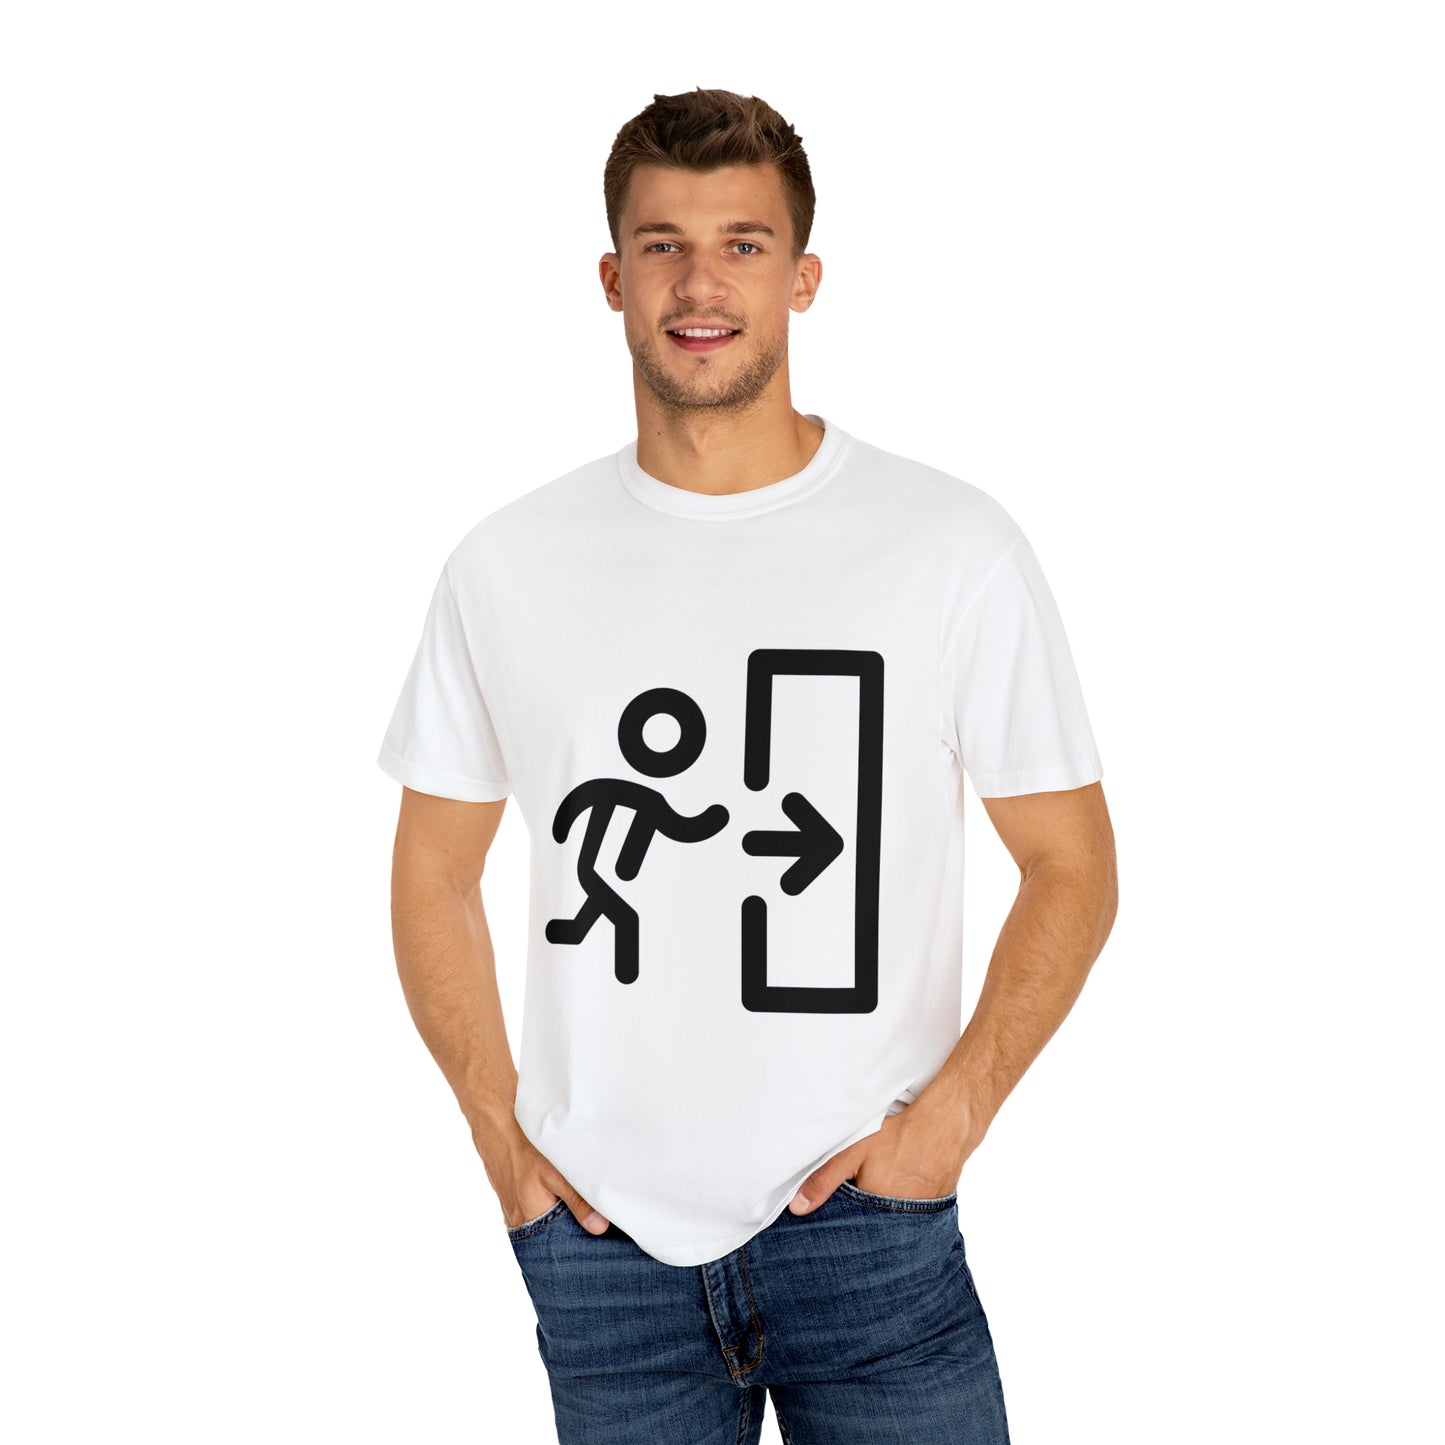 This way out T-Shirt